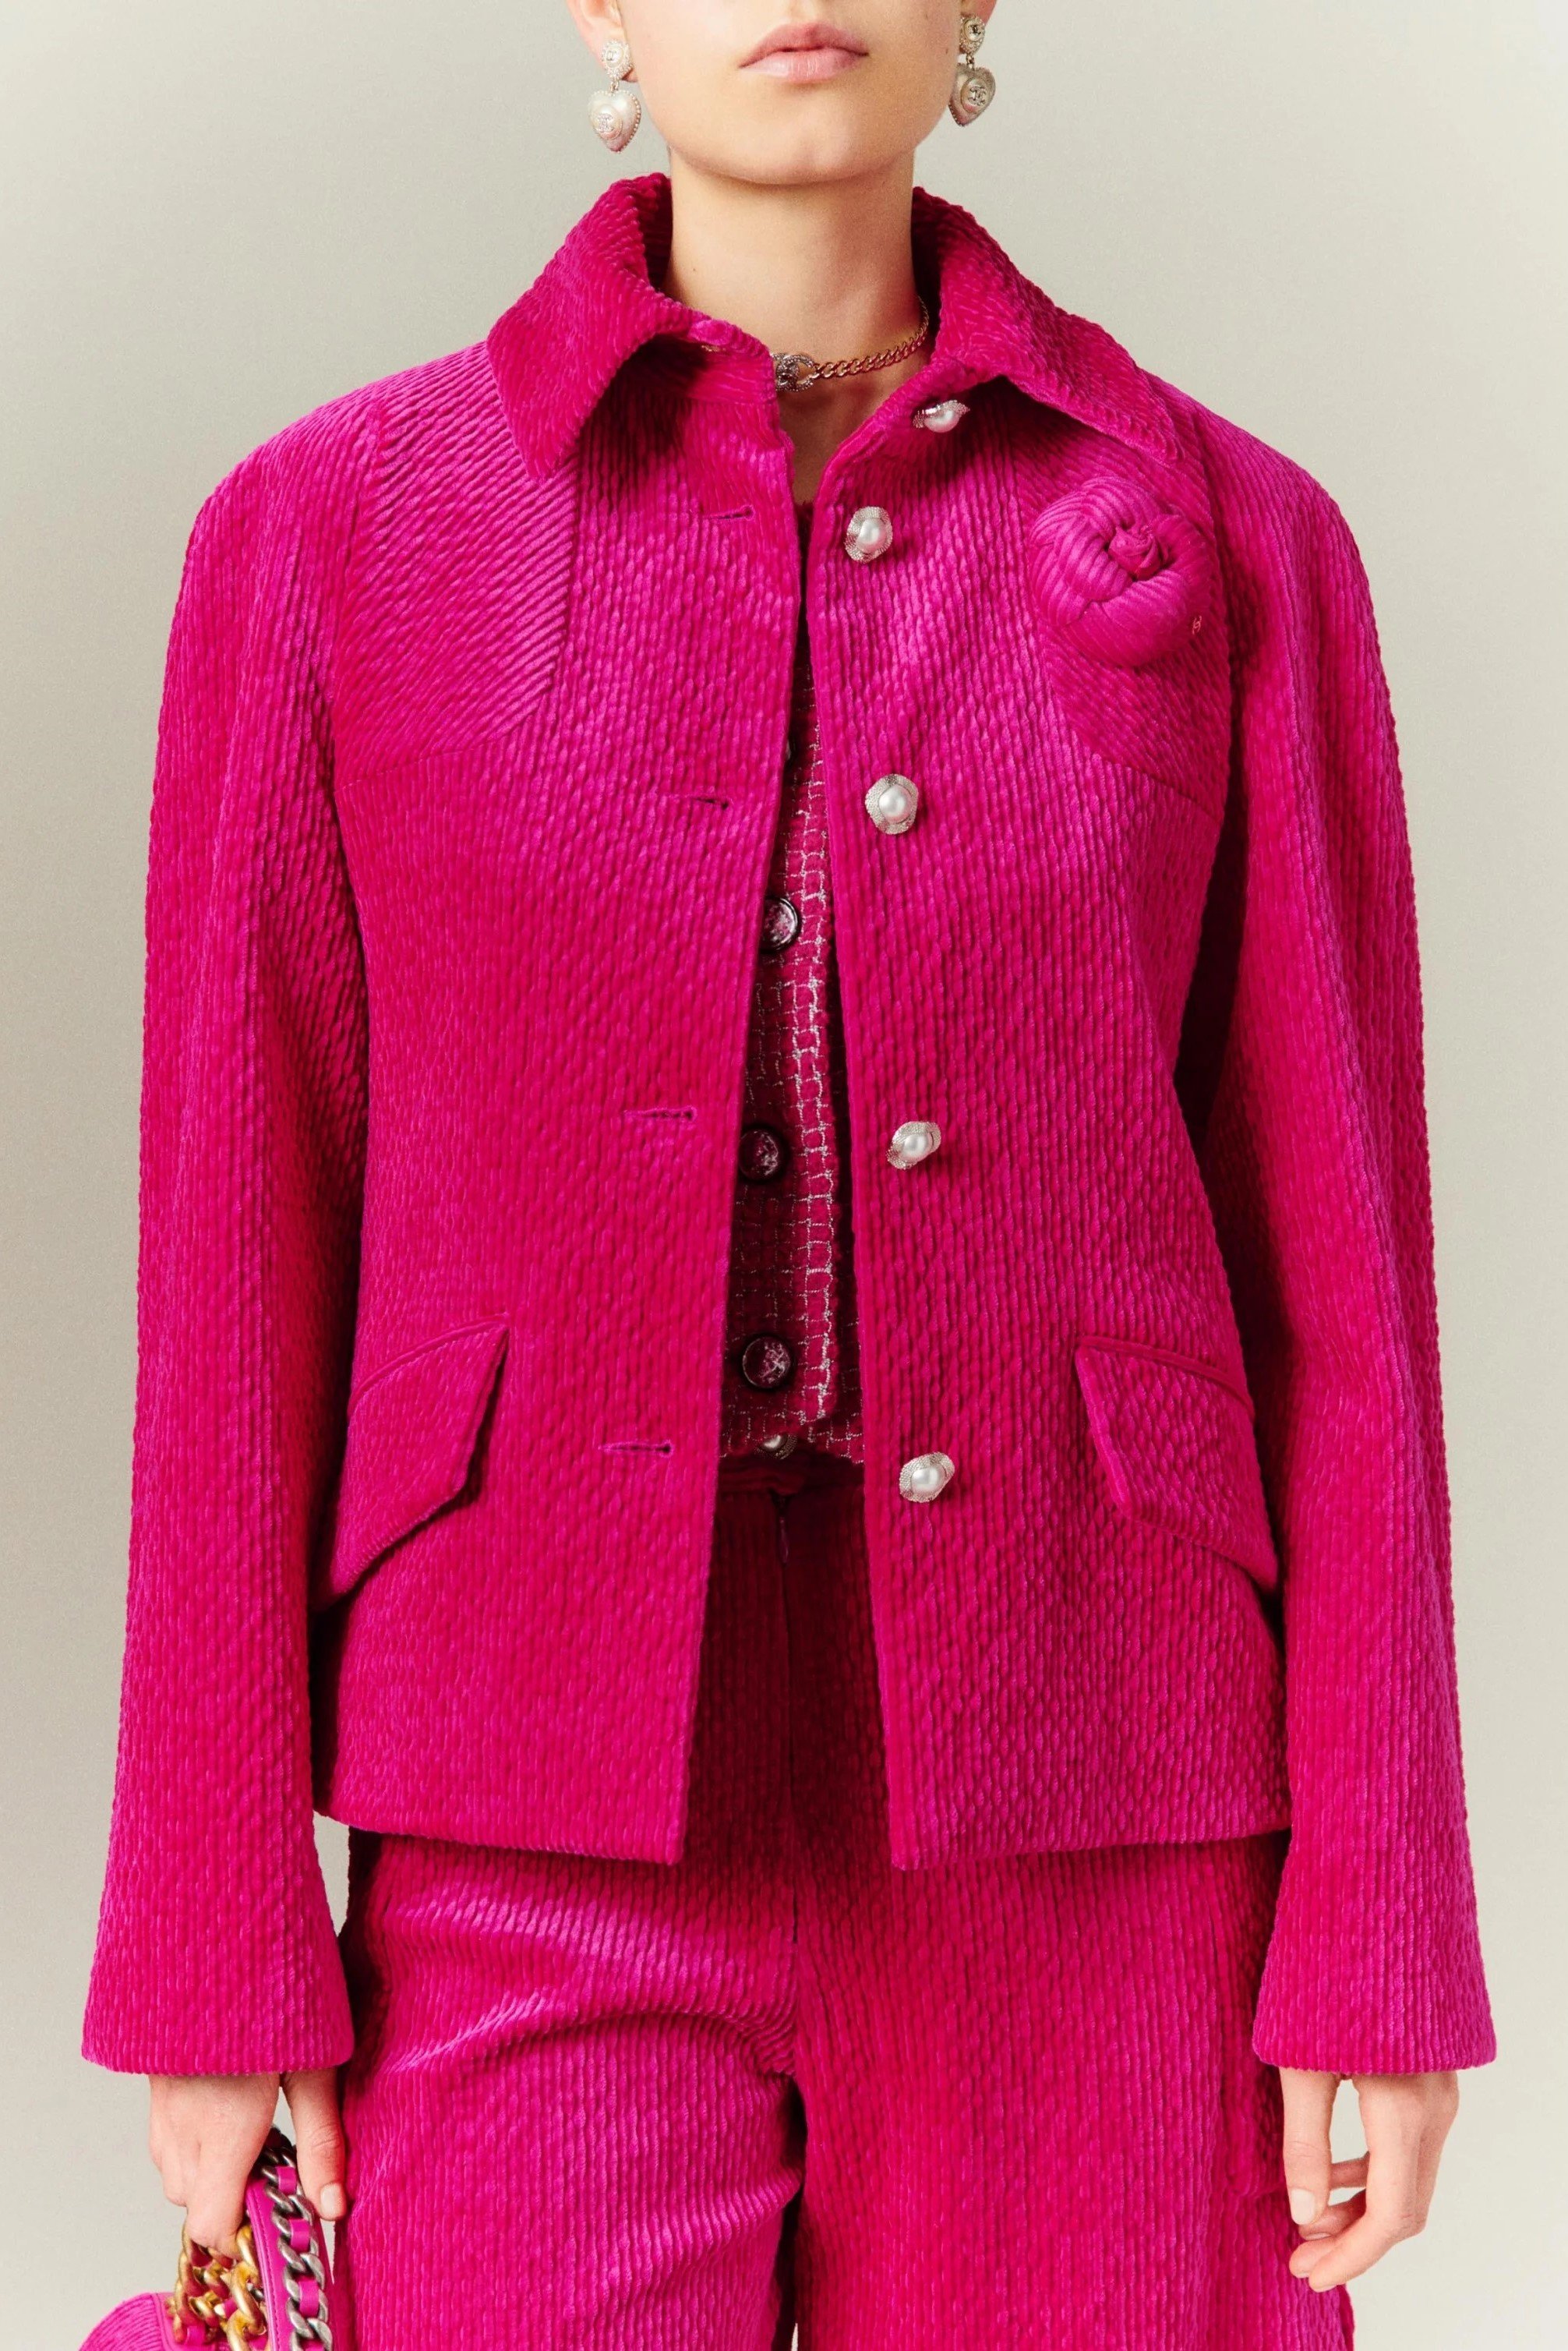 Chanel Corduroy Jacket with Pearl Buttons.jpg